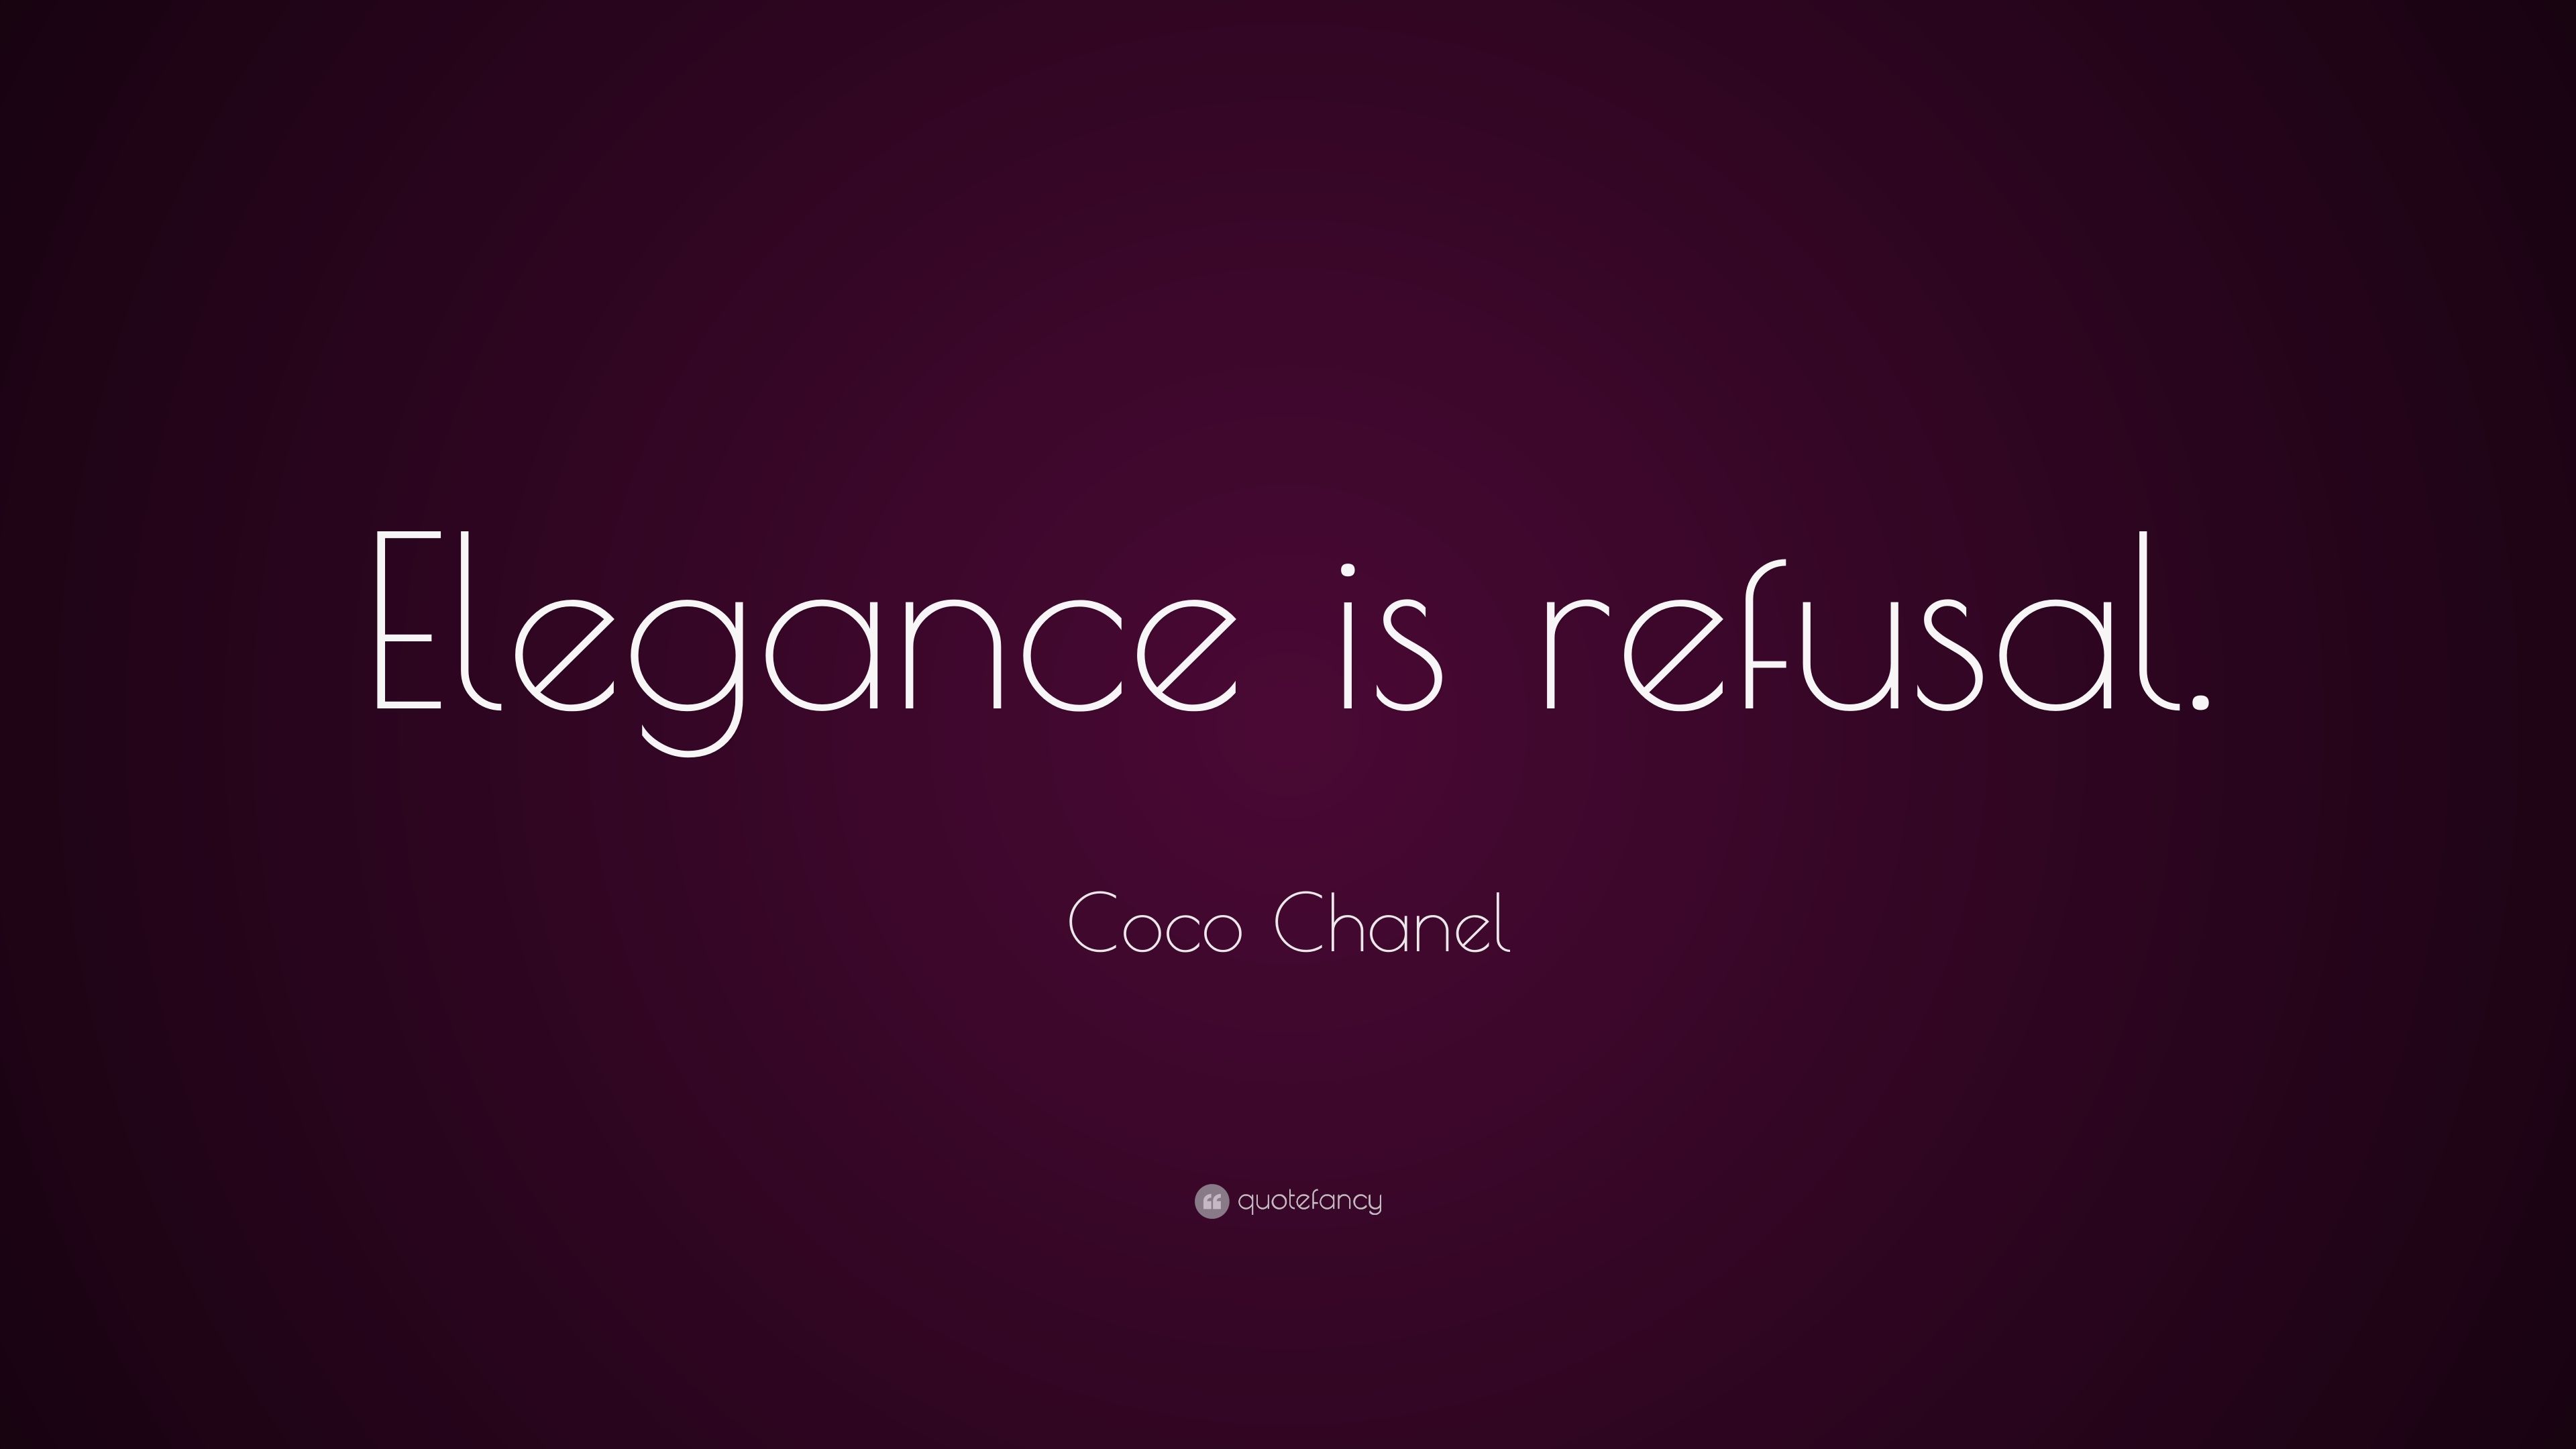 Coco Chanel Quote: “Elegance is refusal.” (5 wallpapers) - Quotefancy